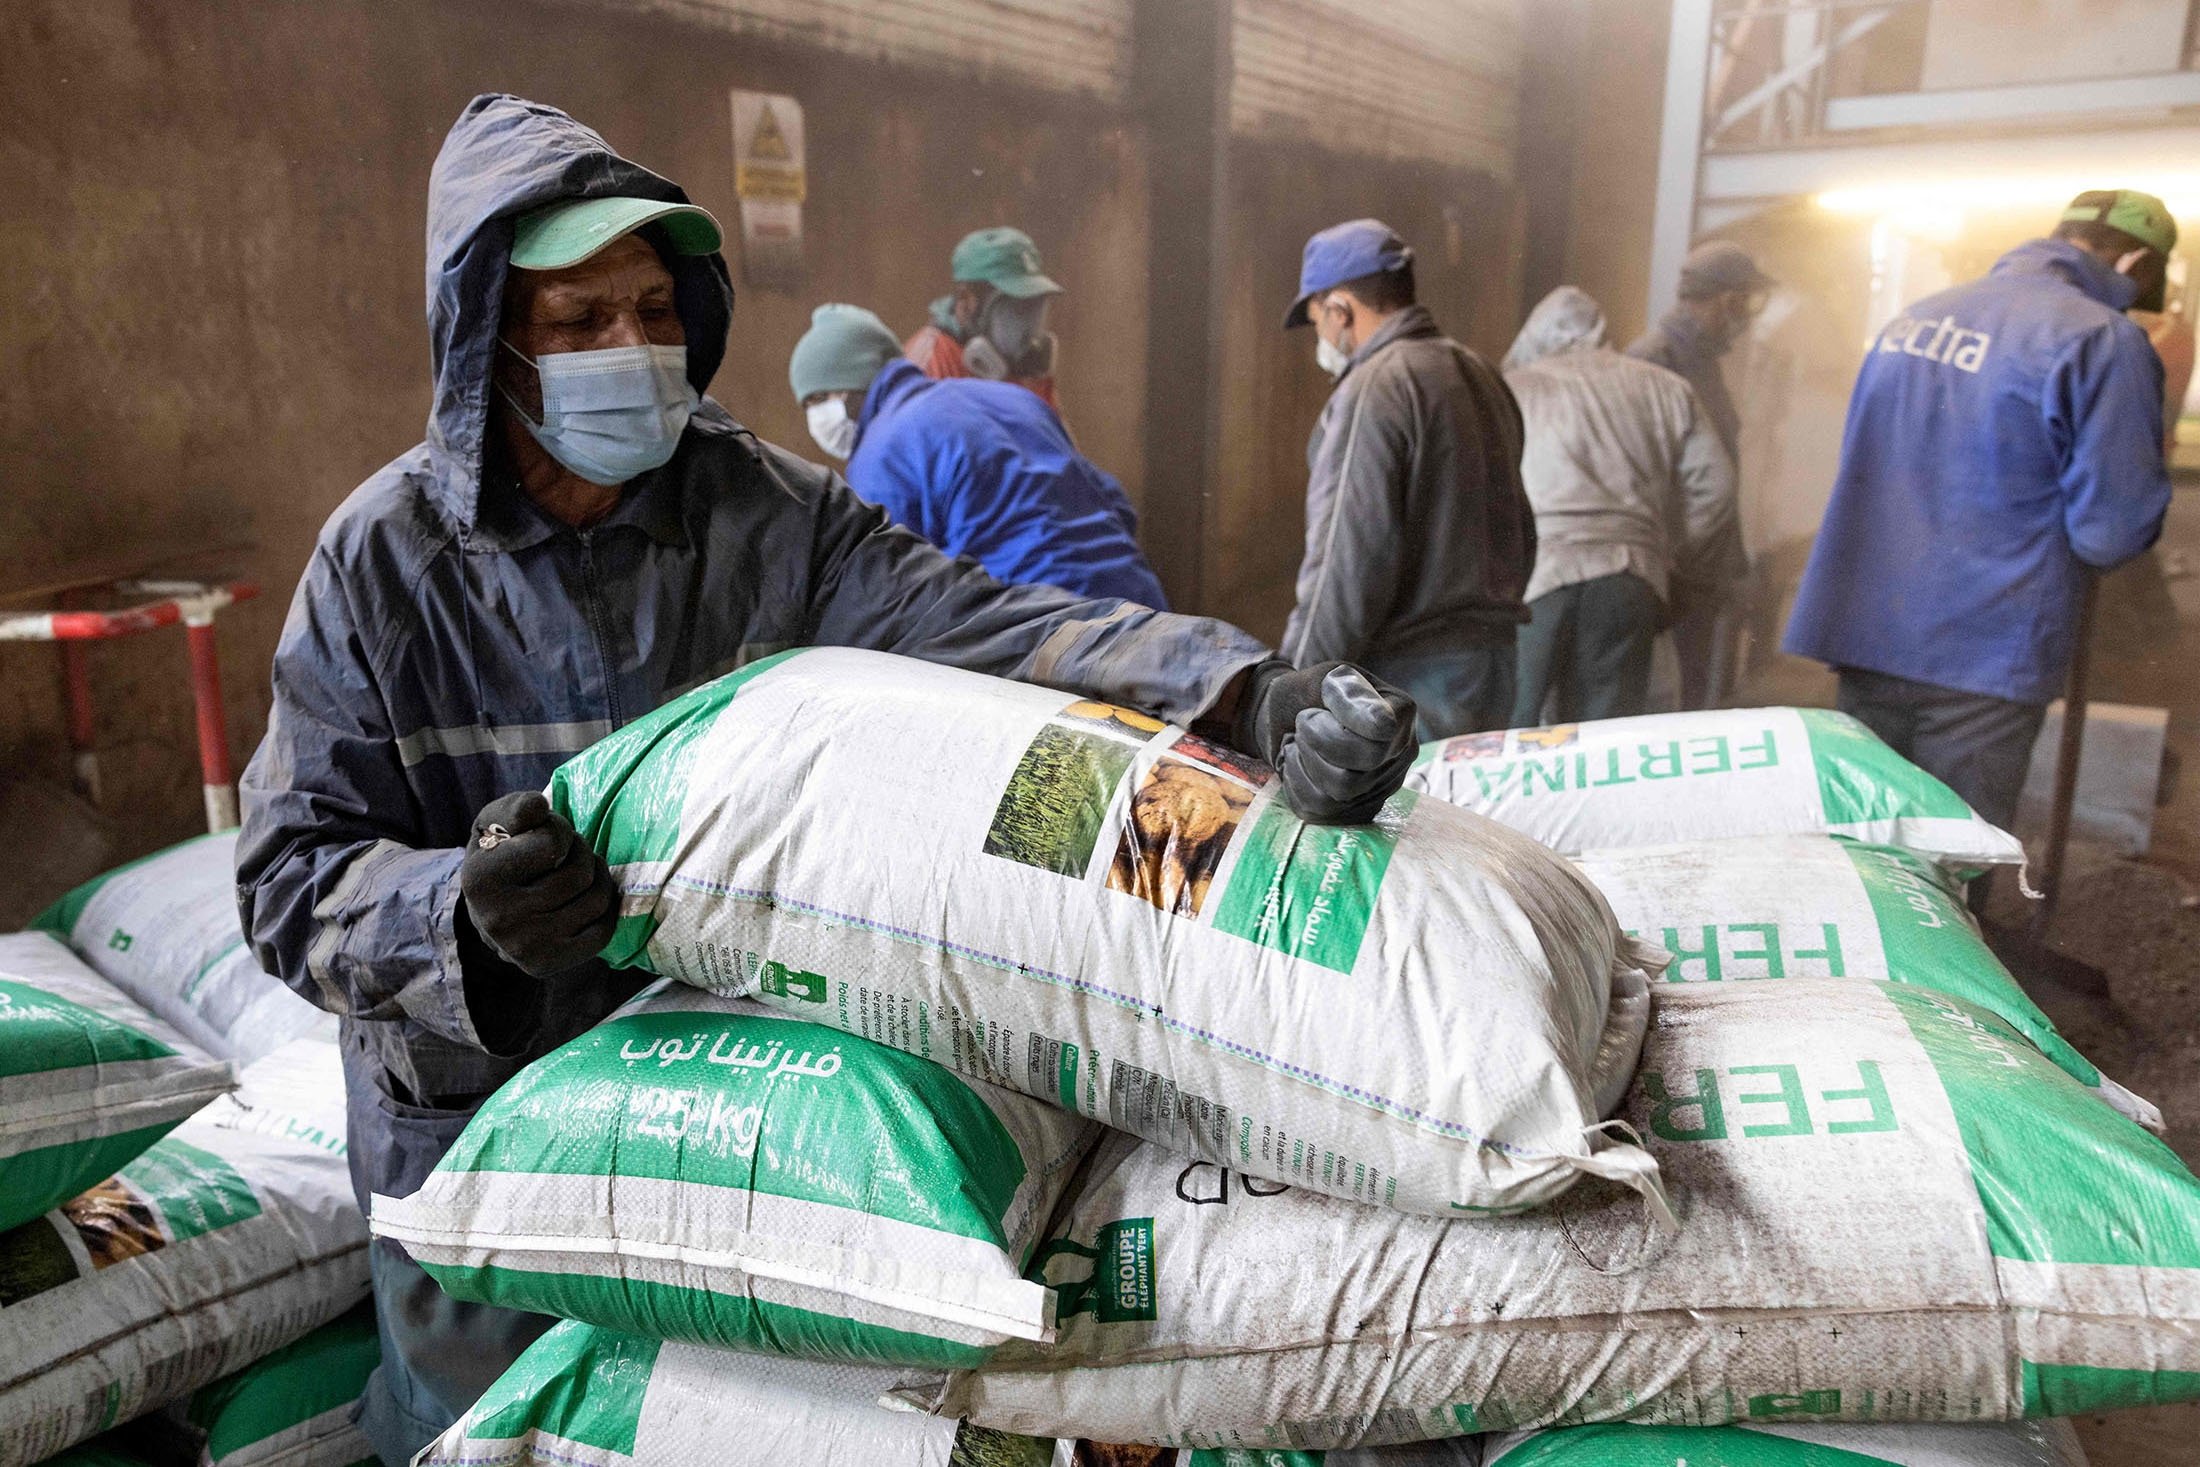 Workers fill bags with fertilizer in the Elephant Vert factory in the 'Agropolis' industrial zone in northern city of Meknes, Morocco, Dec. 9, 2021. (AFP Photo)